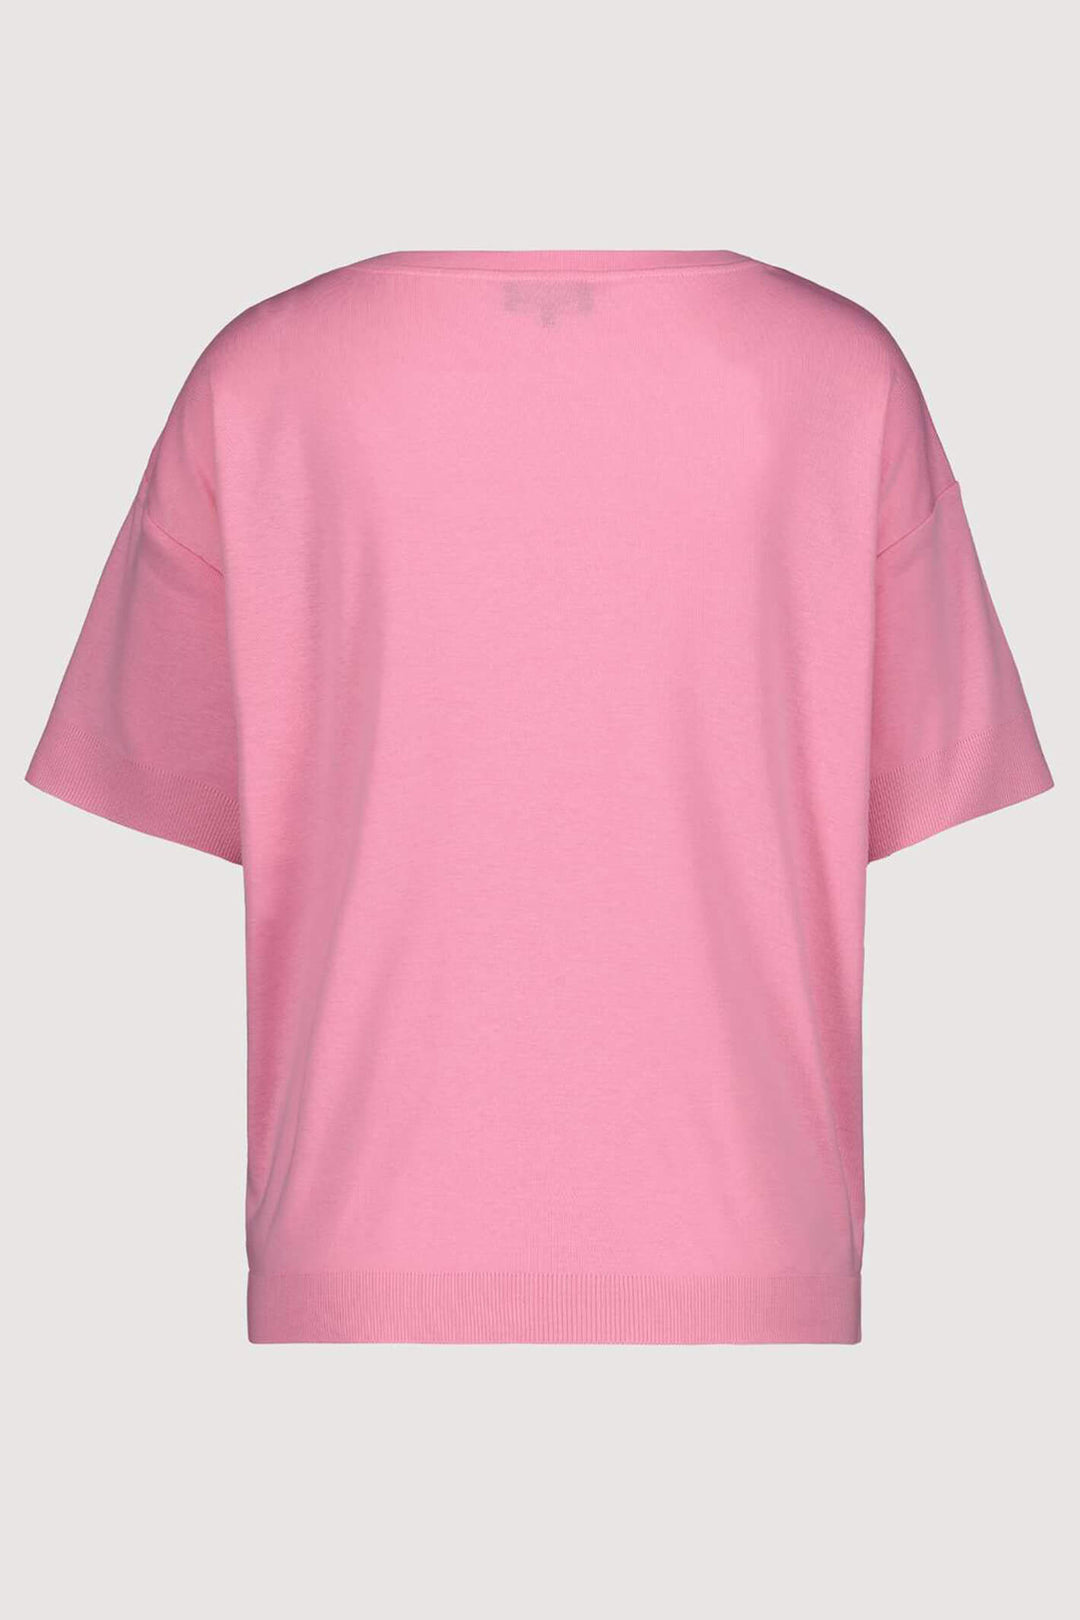 Monari 406773 Pink Knitted T-Shirt - Experience Boutique